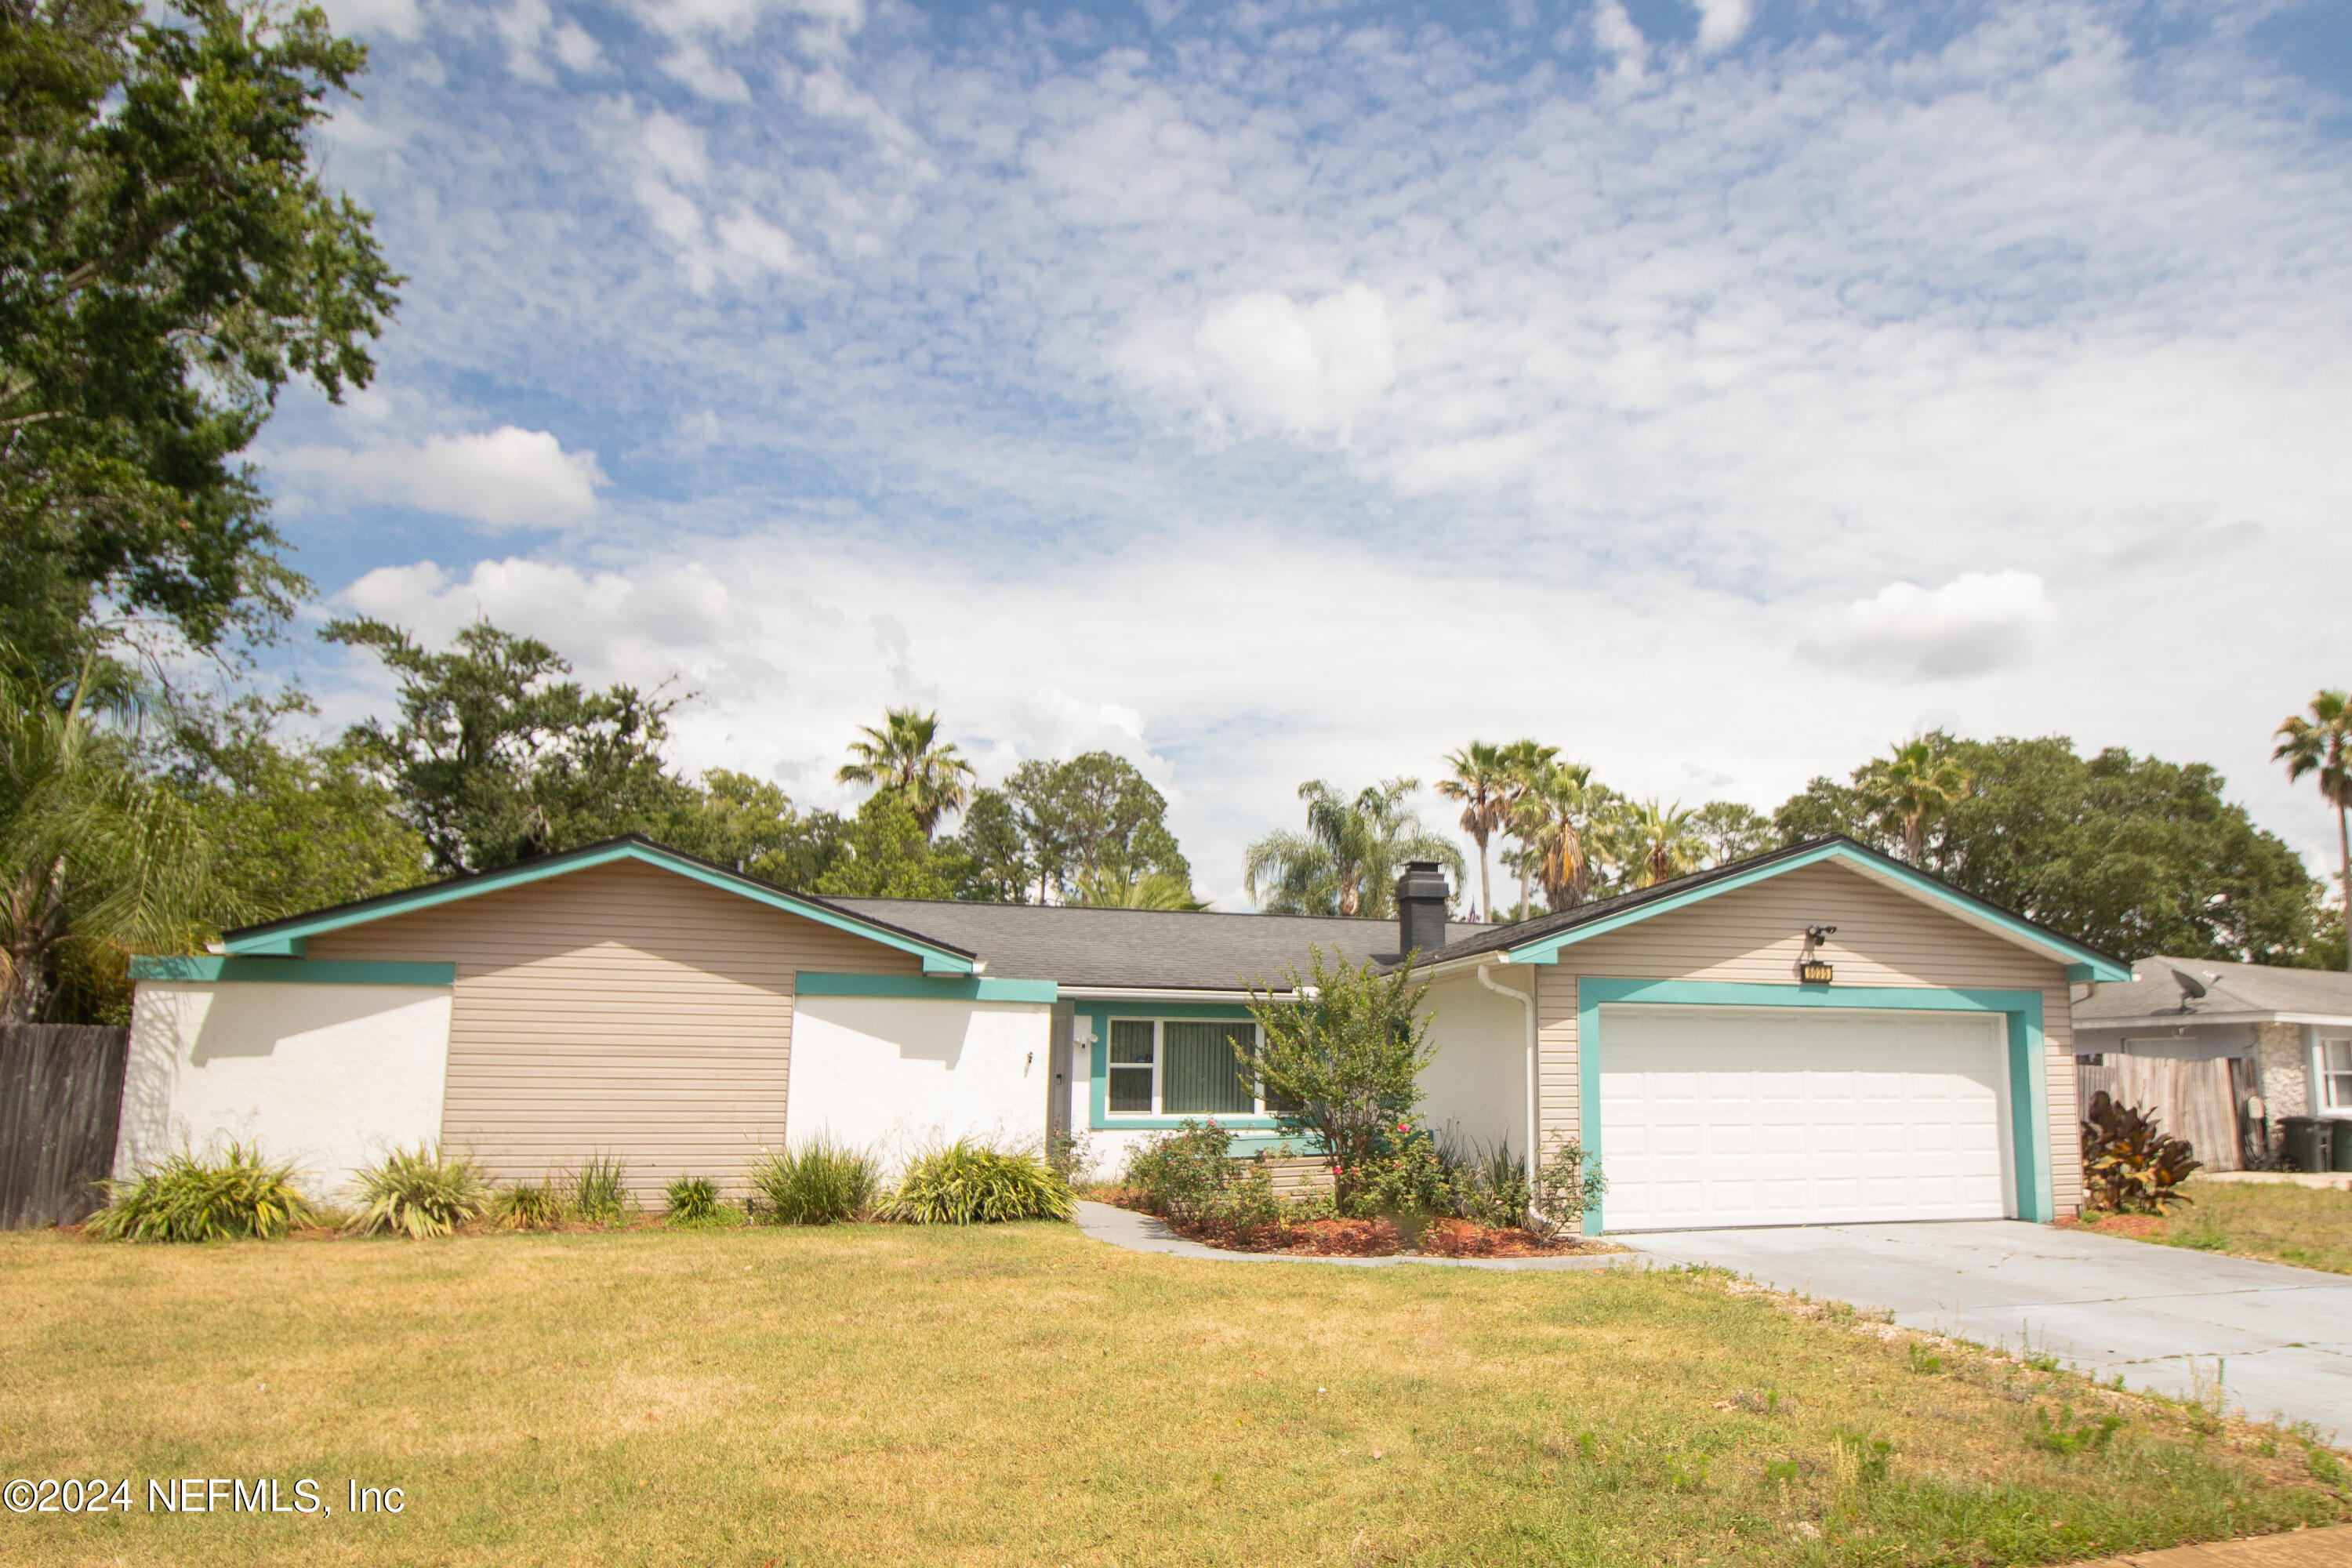 Jacksonville, FL home for sale located at 6035 Caprice Drive, Jacksonville, FL 32244